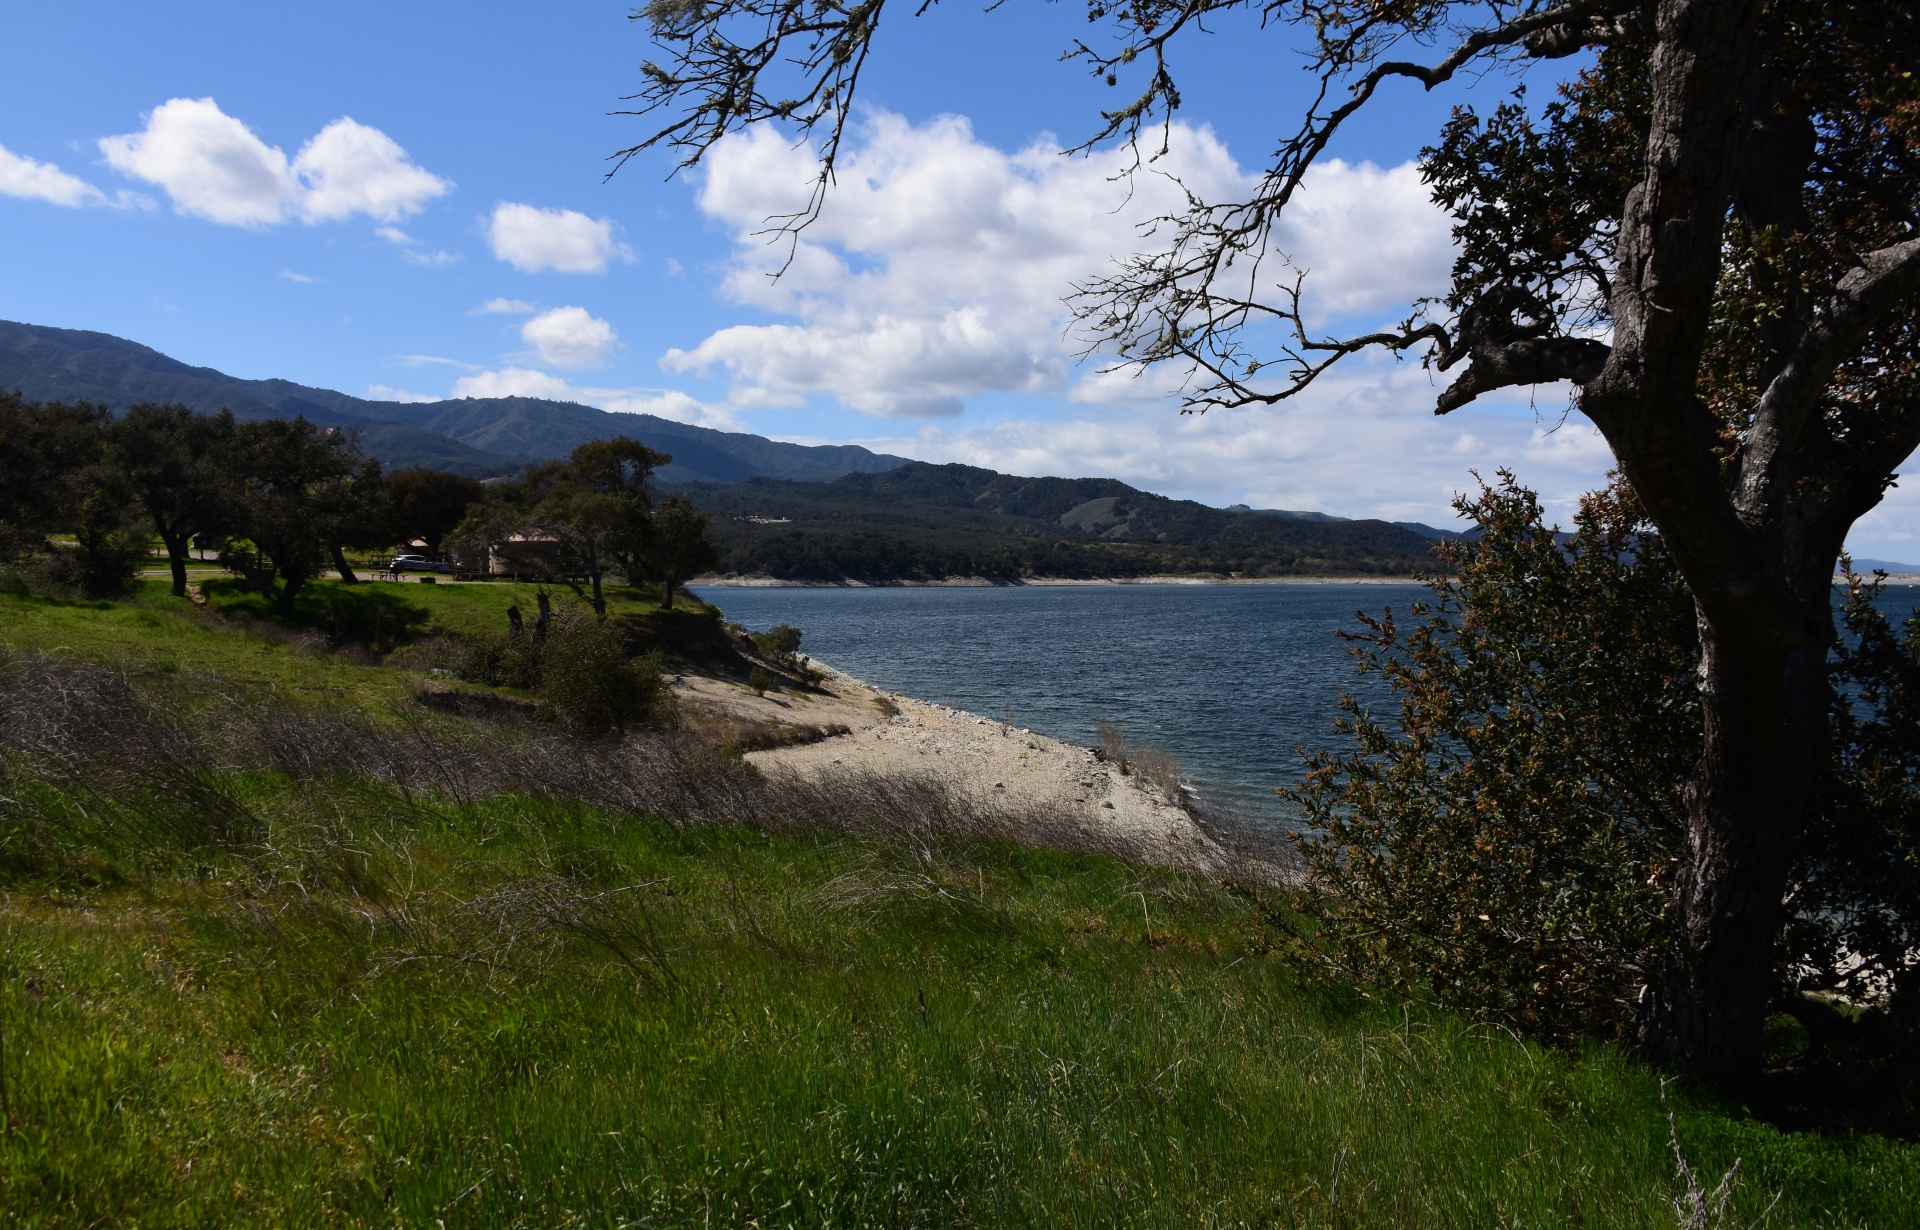 the grassy green shores of the large lake reservoir of Lake Cachuma